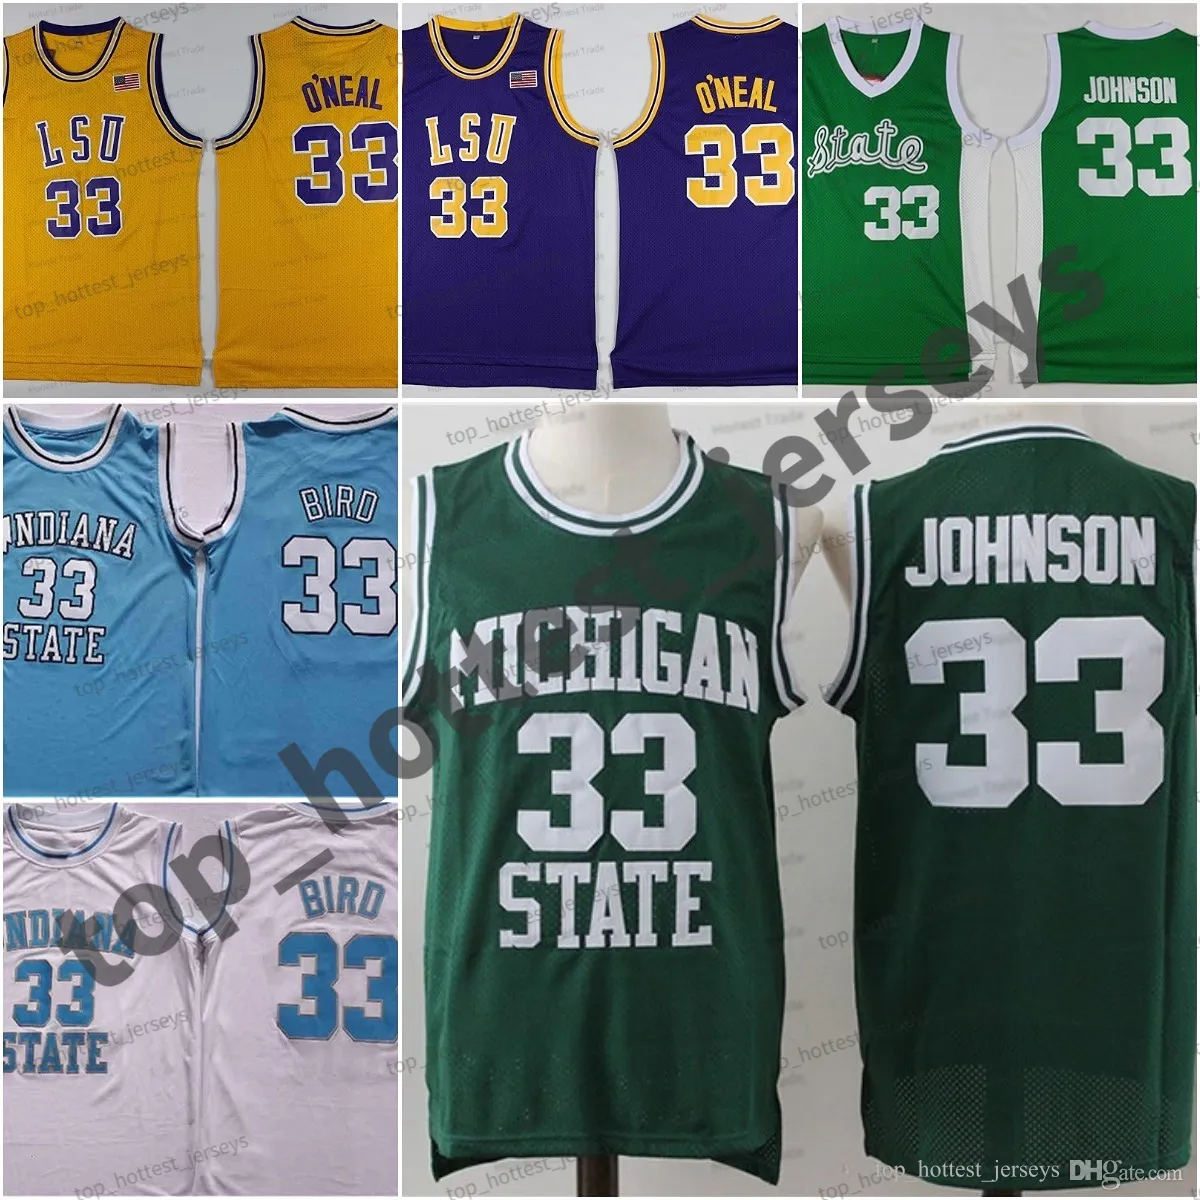 Indiana State Sycamores 33 Larry Bird White Jersey 33 Johnson Green LSU Tigers 33 Shaquille ONeal Michigan College Football Maglie Mens All Stitched Shirts